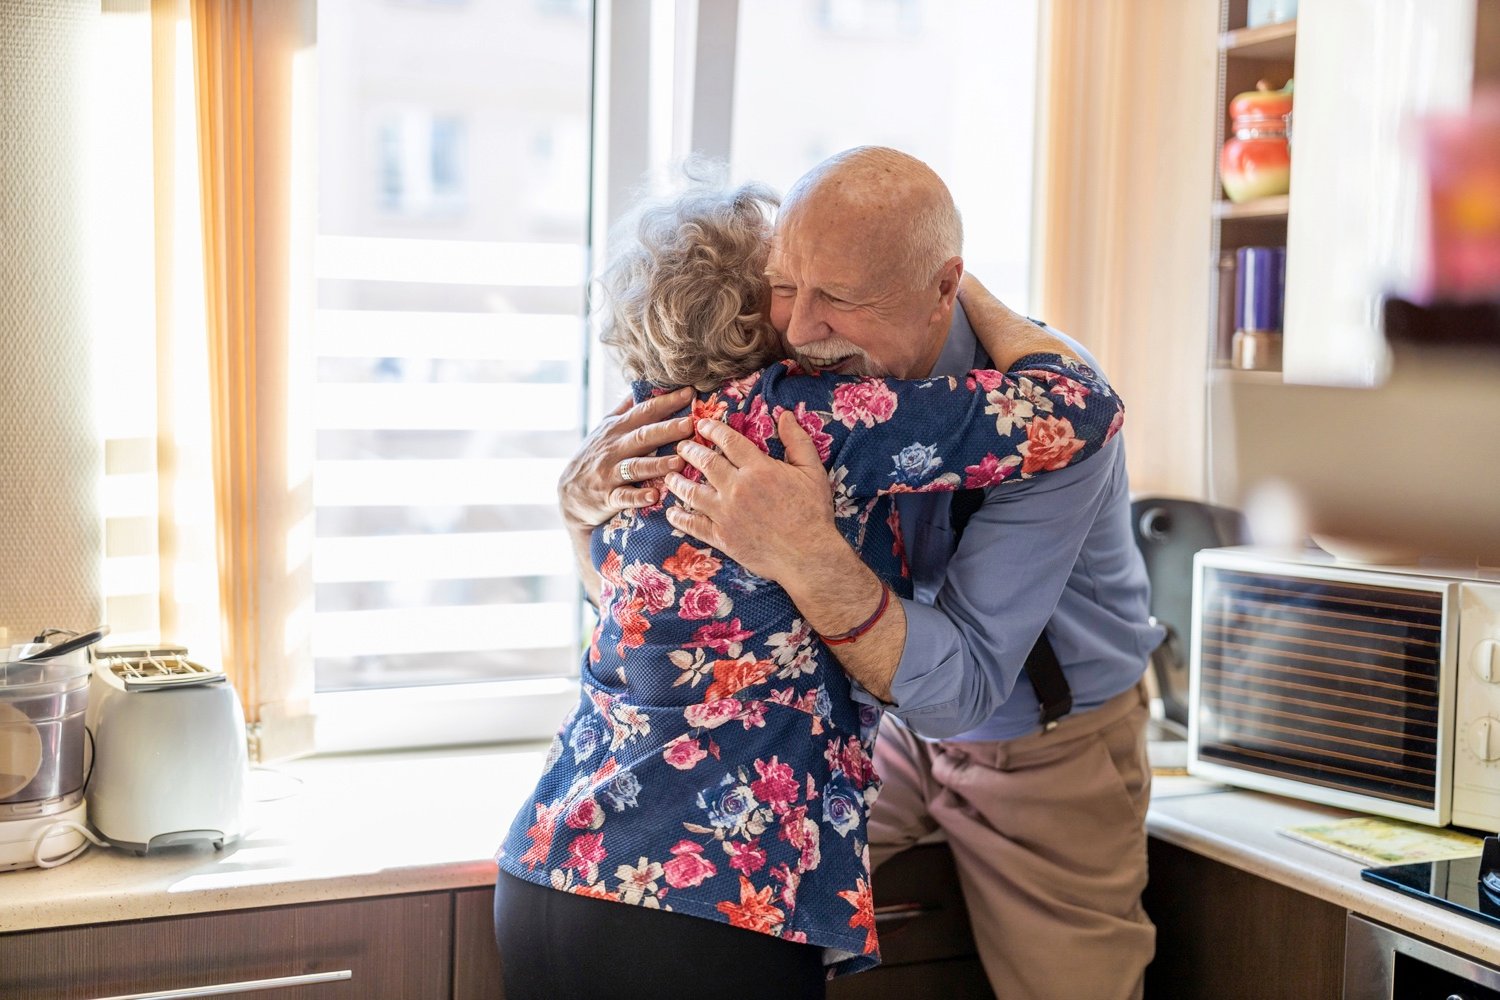 Elderly couple embracing and smiling in the kitchen